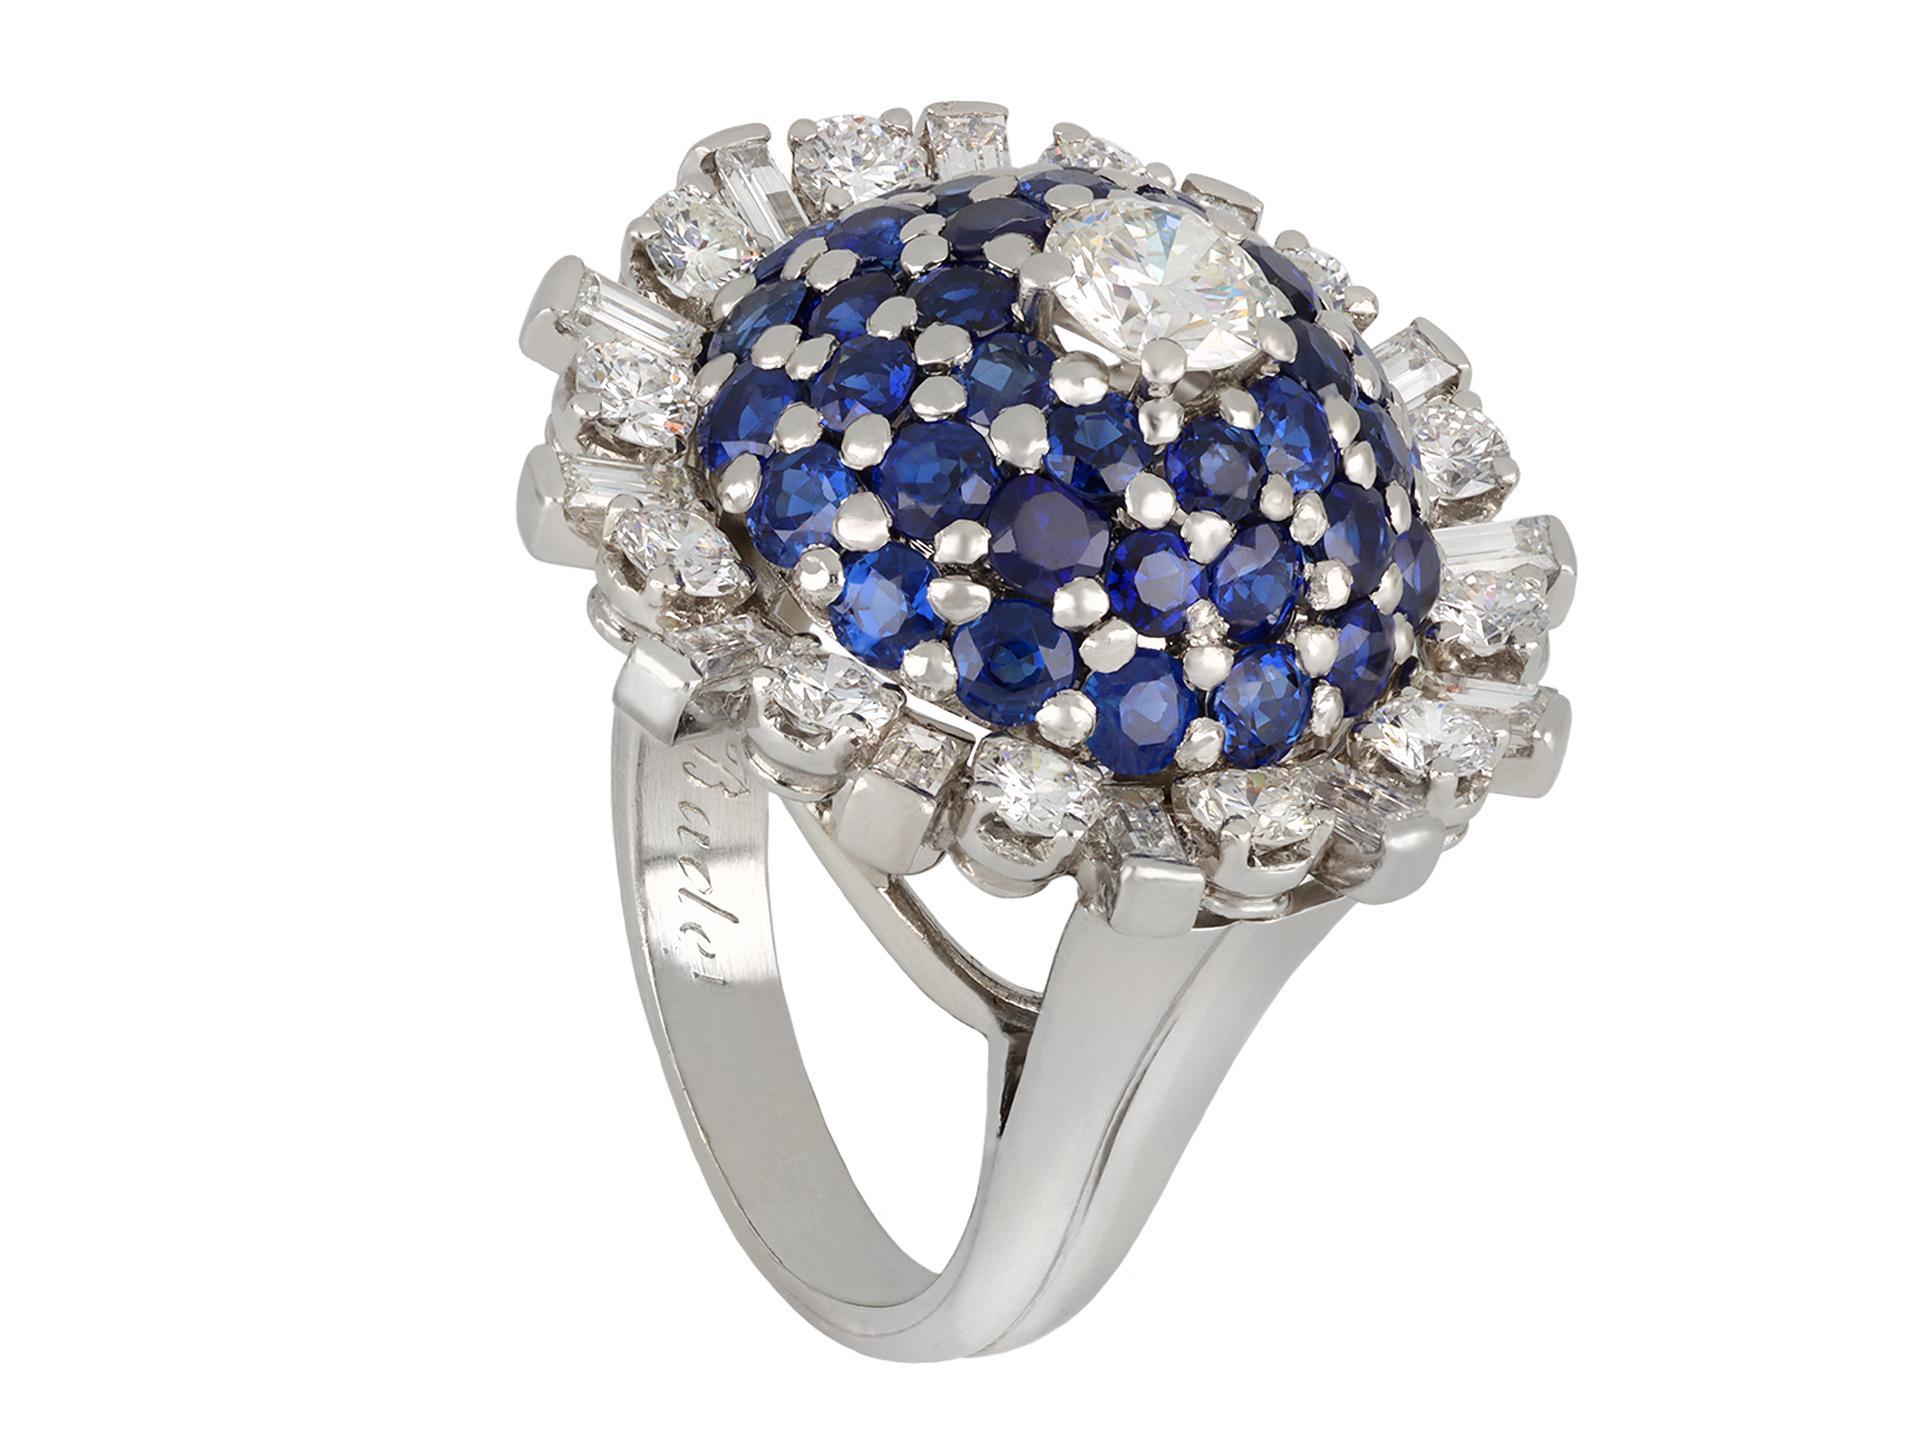 Gubelin sapphire and diamond bombé cocktail ring. Set to centre with one round transitional cut diamond in an open back claw setting with an approximate weight of 0.80 carats, flanked by a cluster of forty round old cut natural unenhanced sapphires